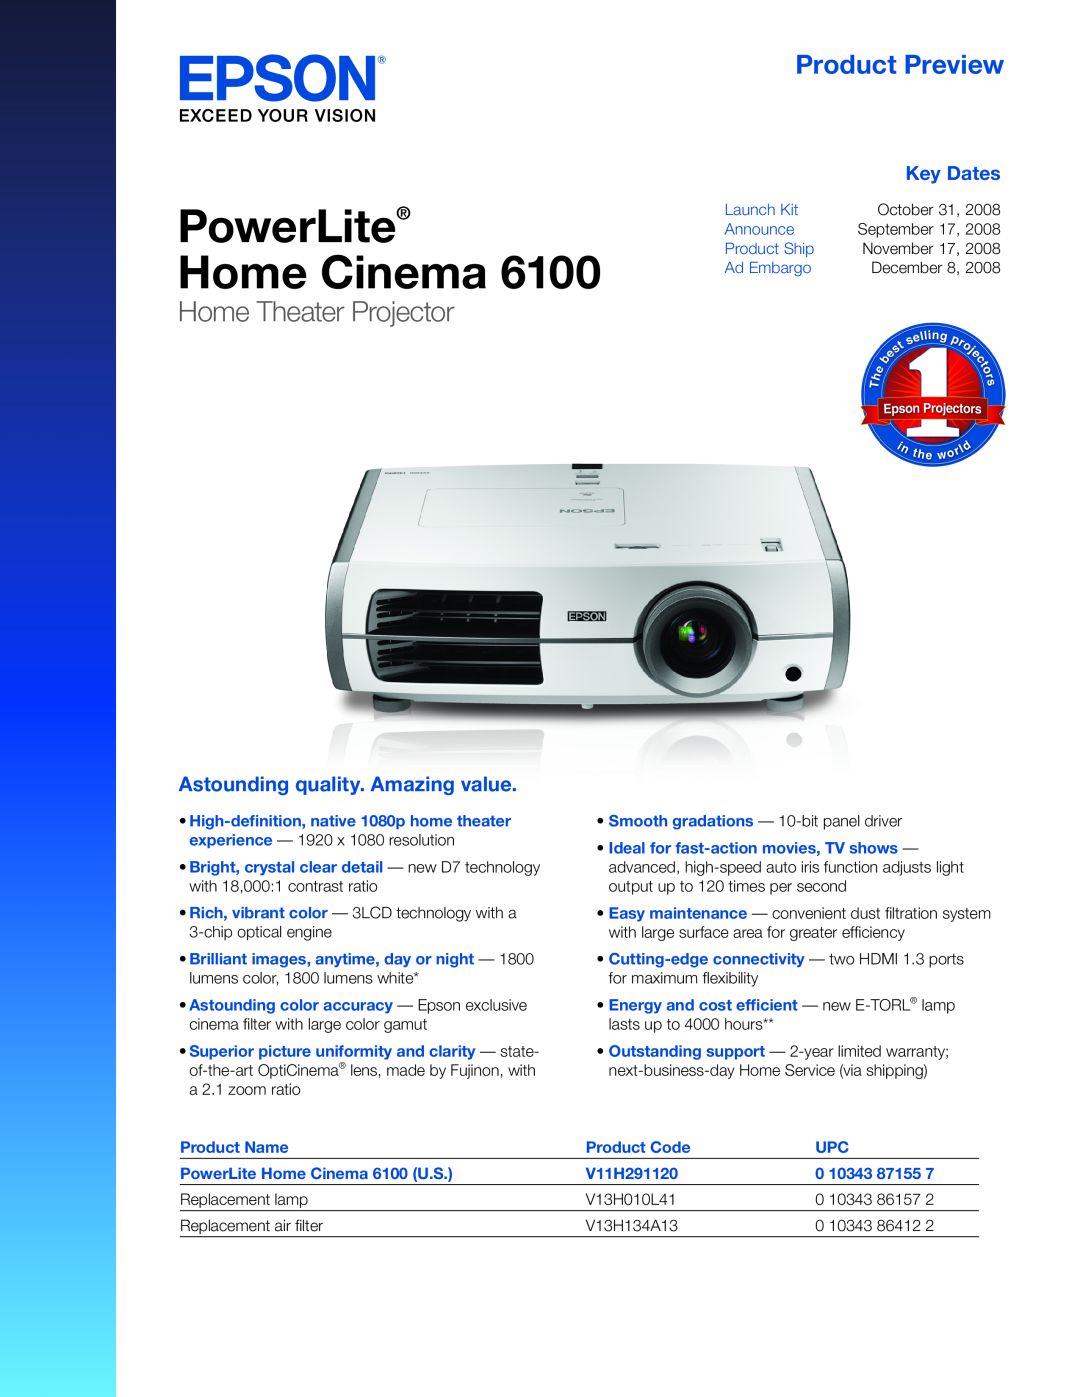 Epson 6100 warranty Home Theater Projector, PowerLite, Home Cinema, Product Preview, Astounding quality. Amazing value 